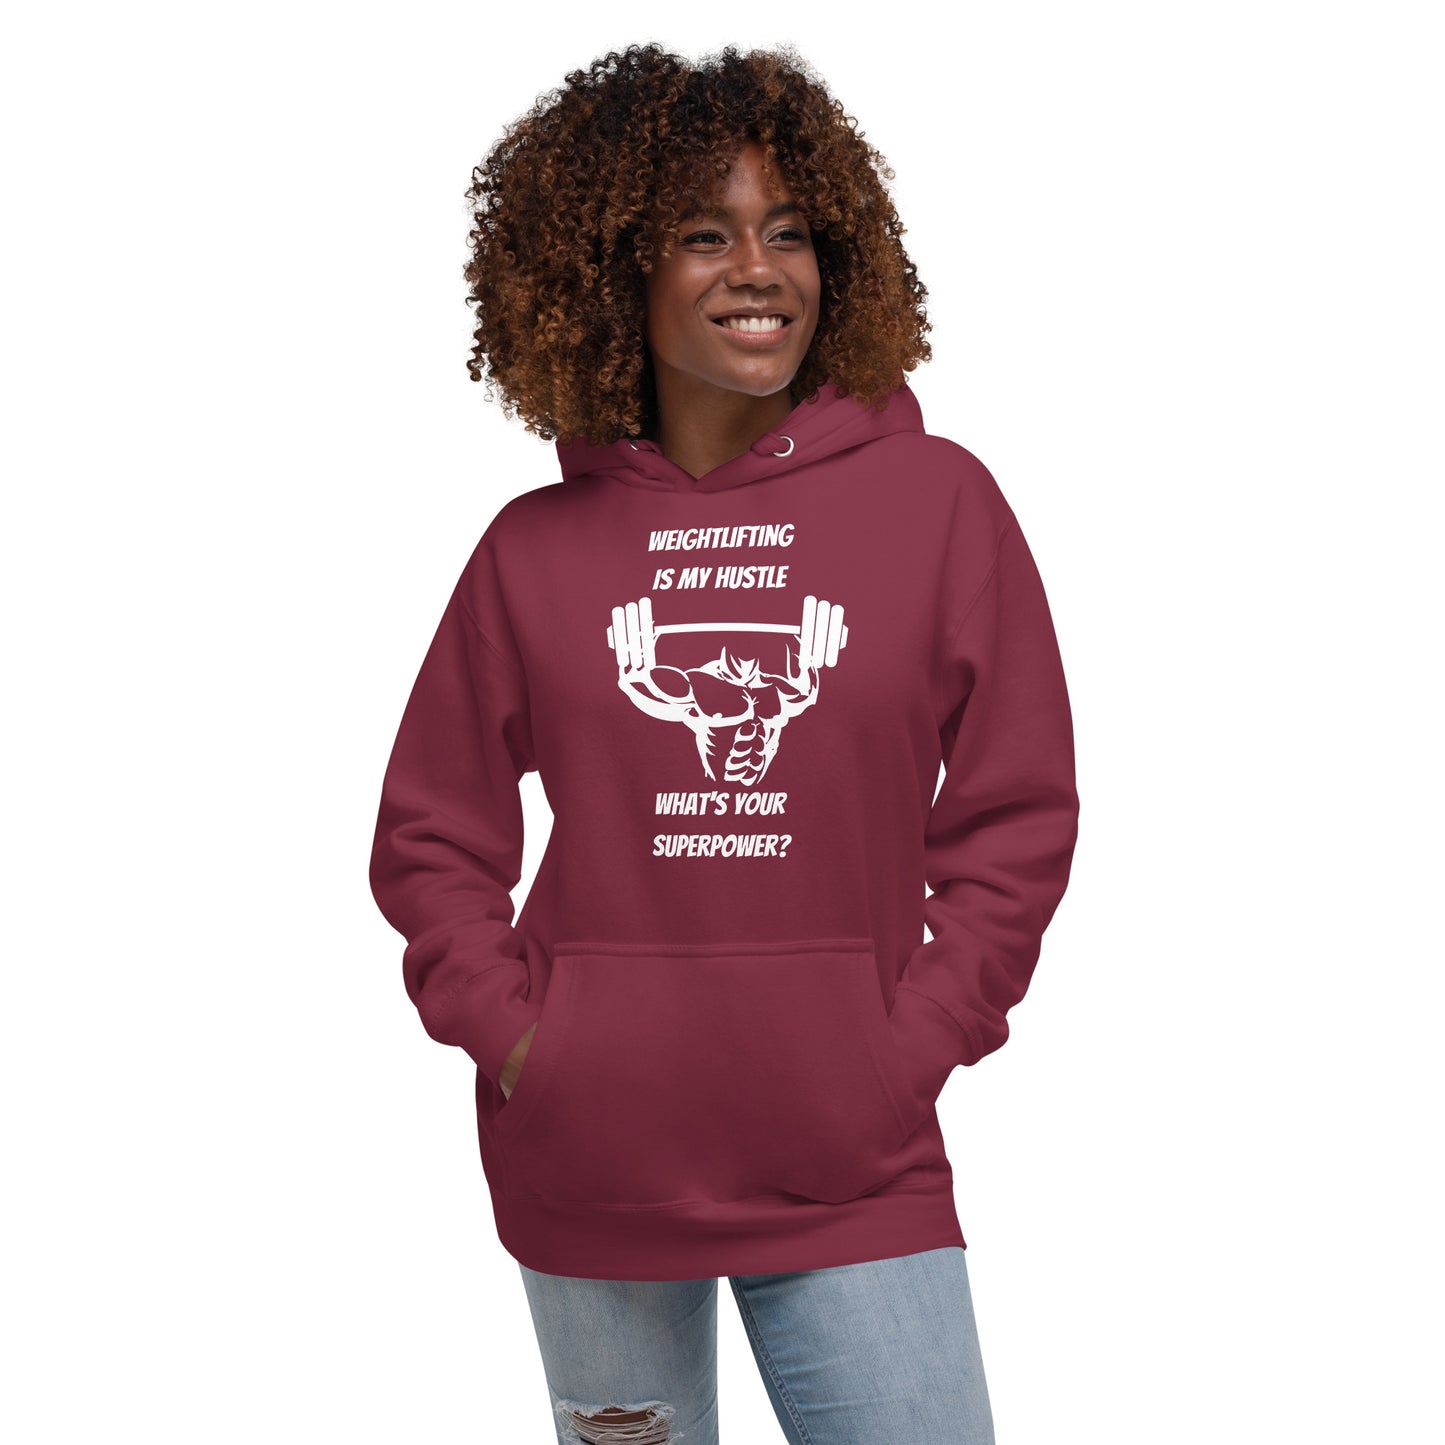 Weightlifting Is My Hustle What's Your Superpower? Unisex Hoodie